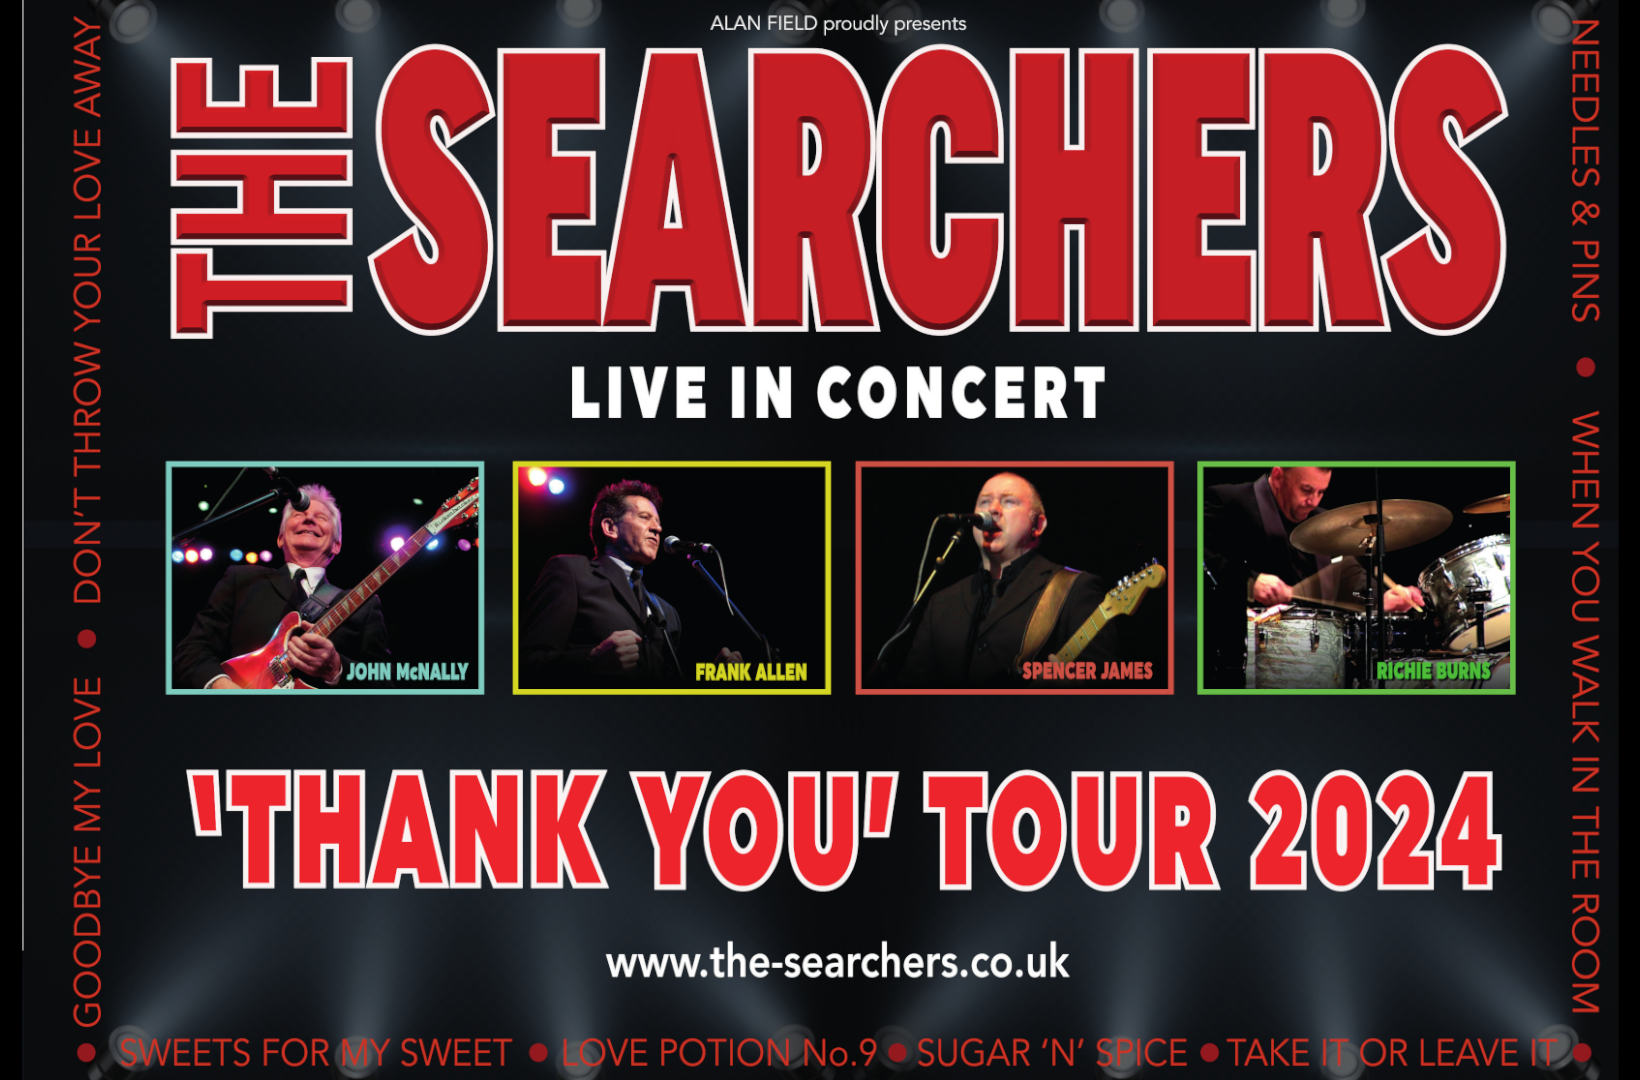 The Searchers Thank You Tour 2024 What's On Reading